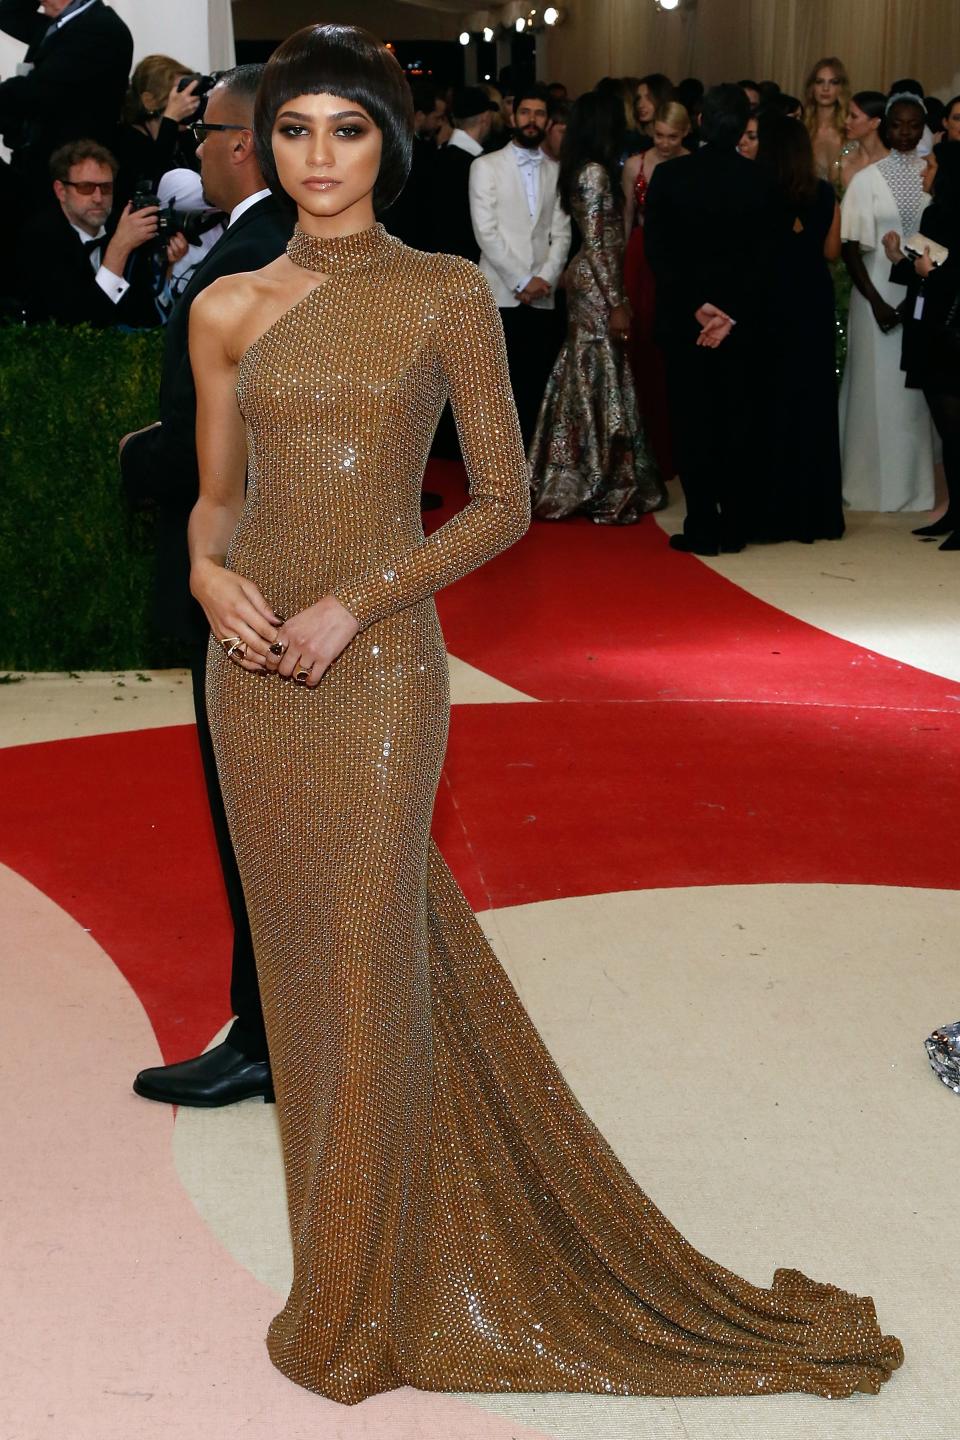 Zendaya in a long-sleeve, mesh, body-hugging gown with a high neck and trail at a gala